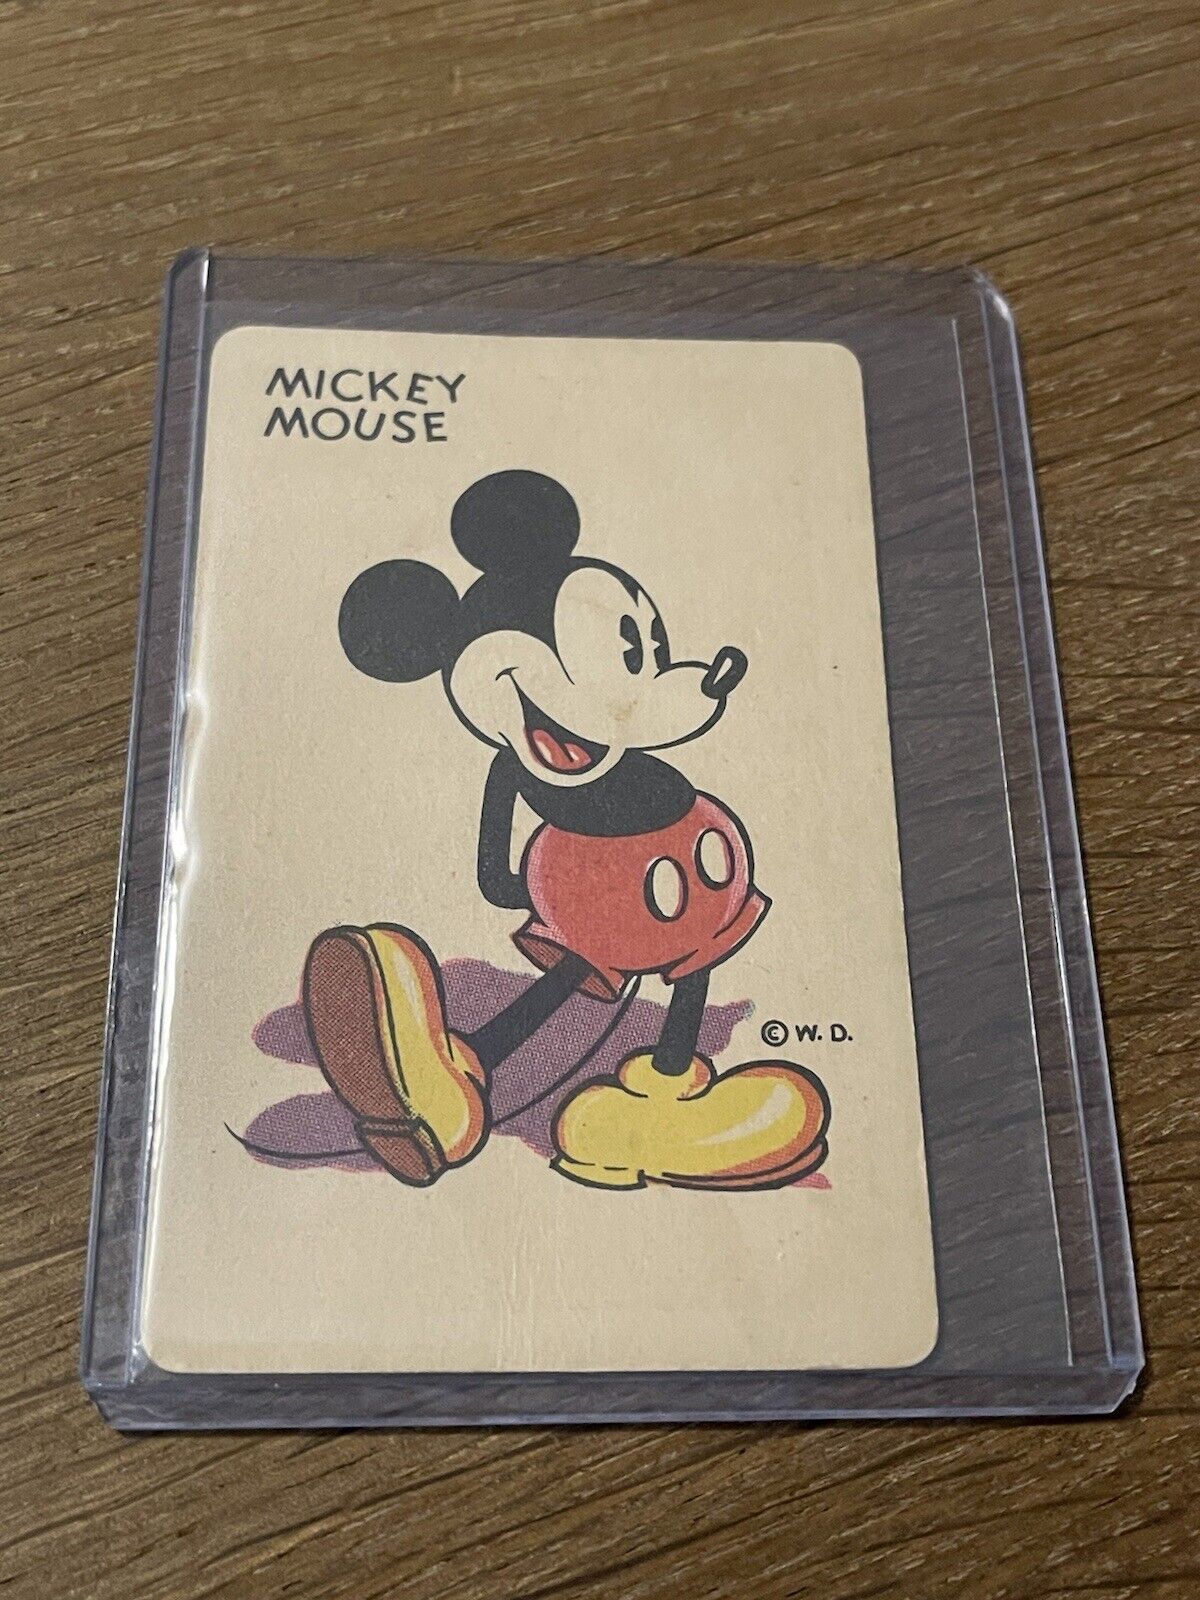 1935 WHITMAN WALT DISNEY PRODUCTIONS 🎥 MICKEY MOUSE CARD GAME PLAYING CARD